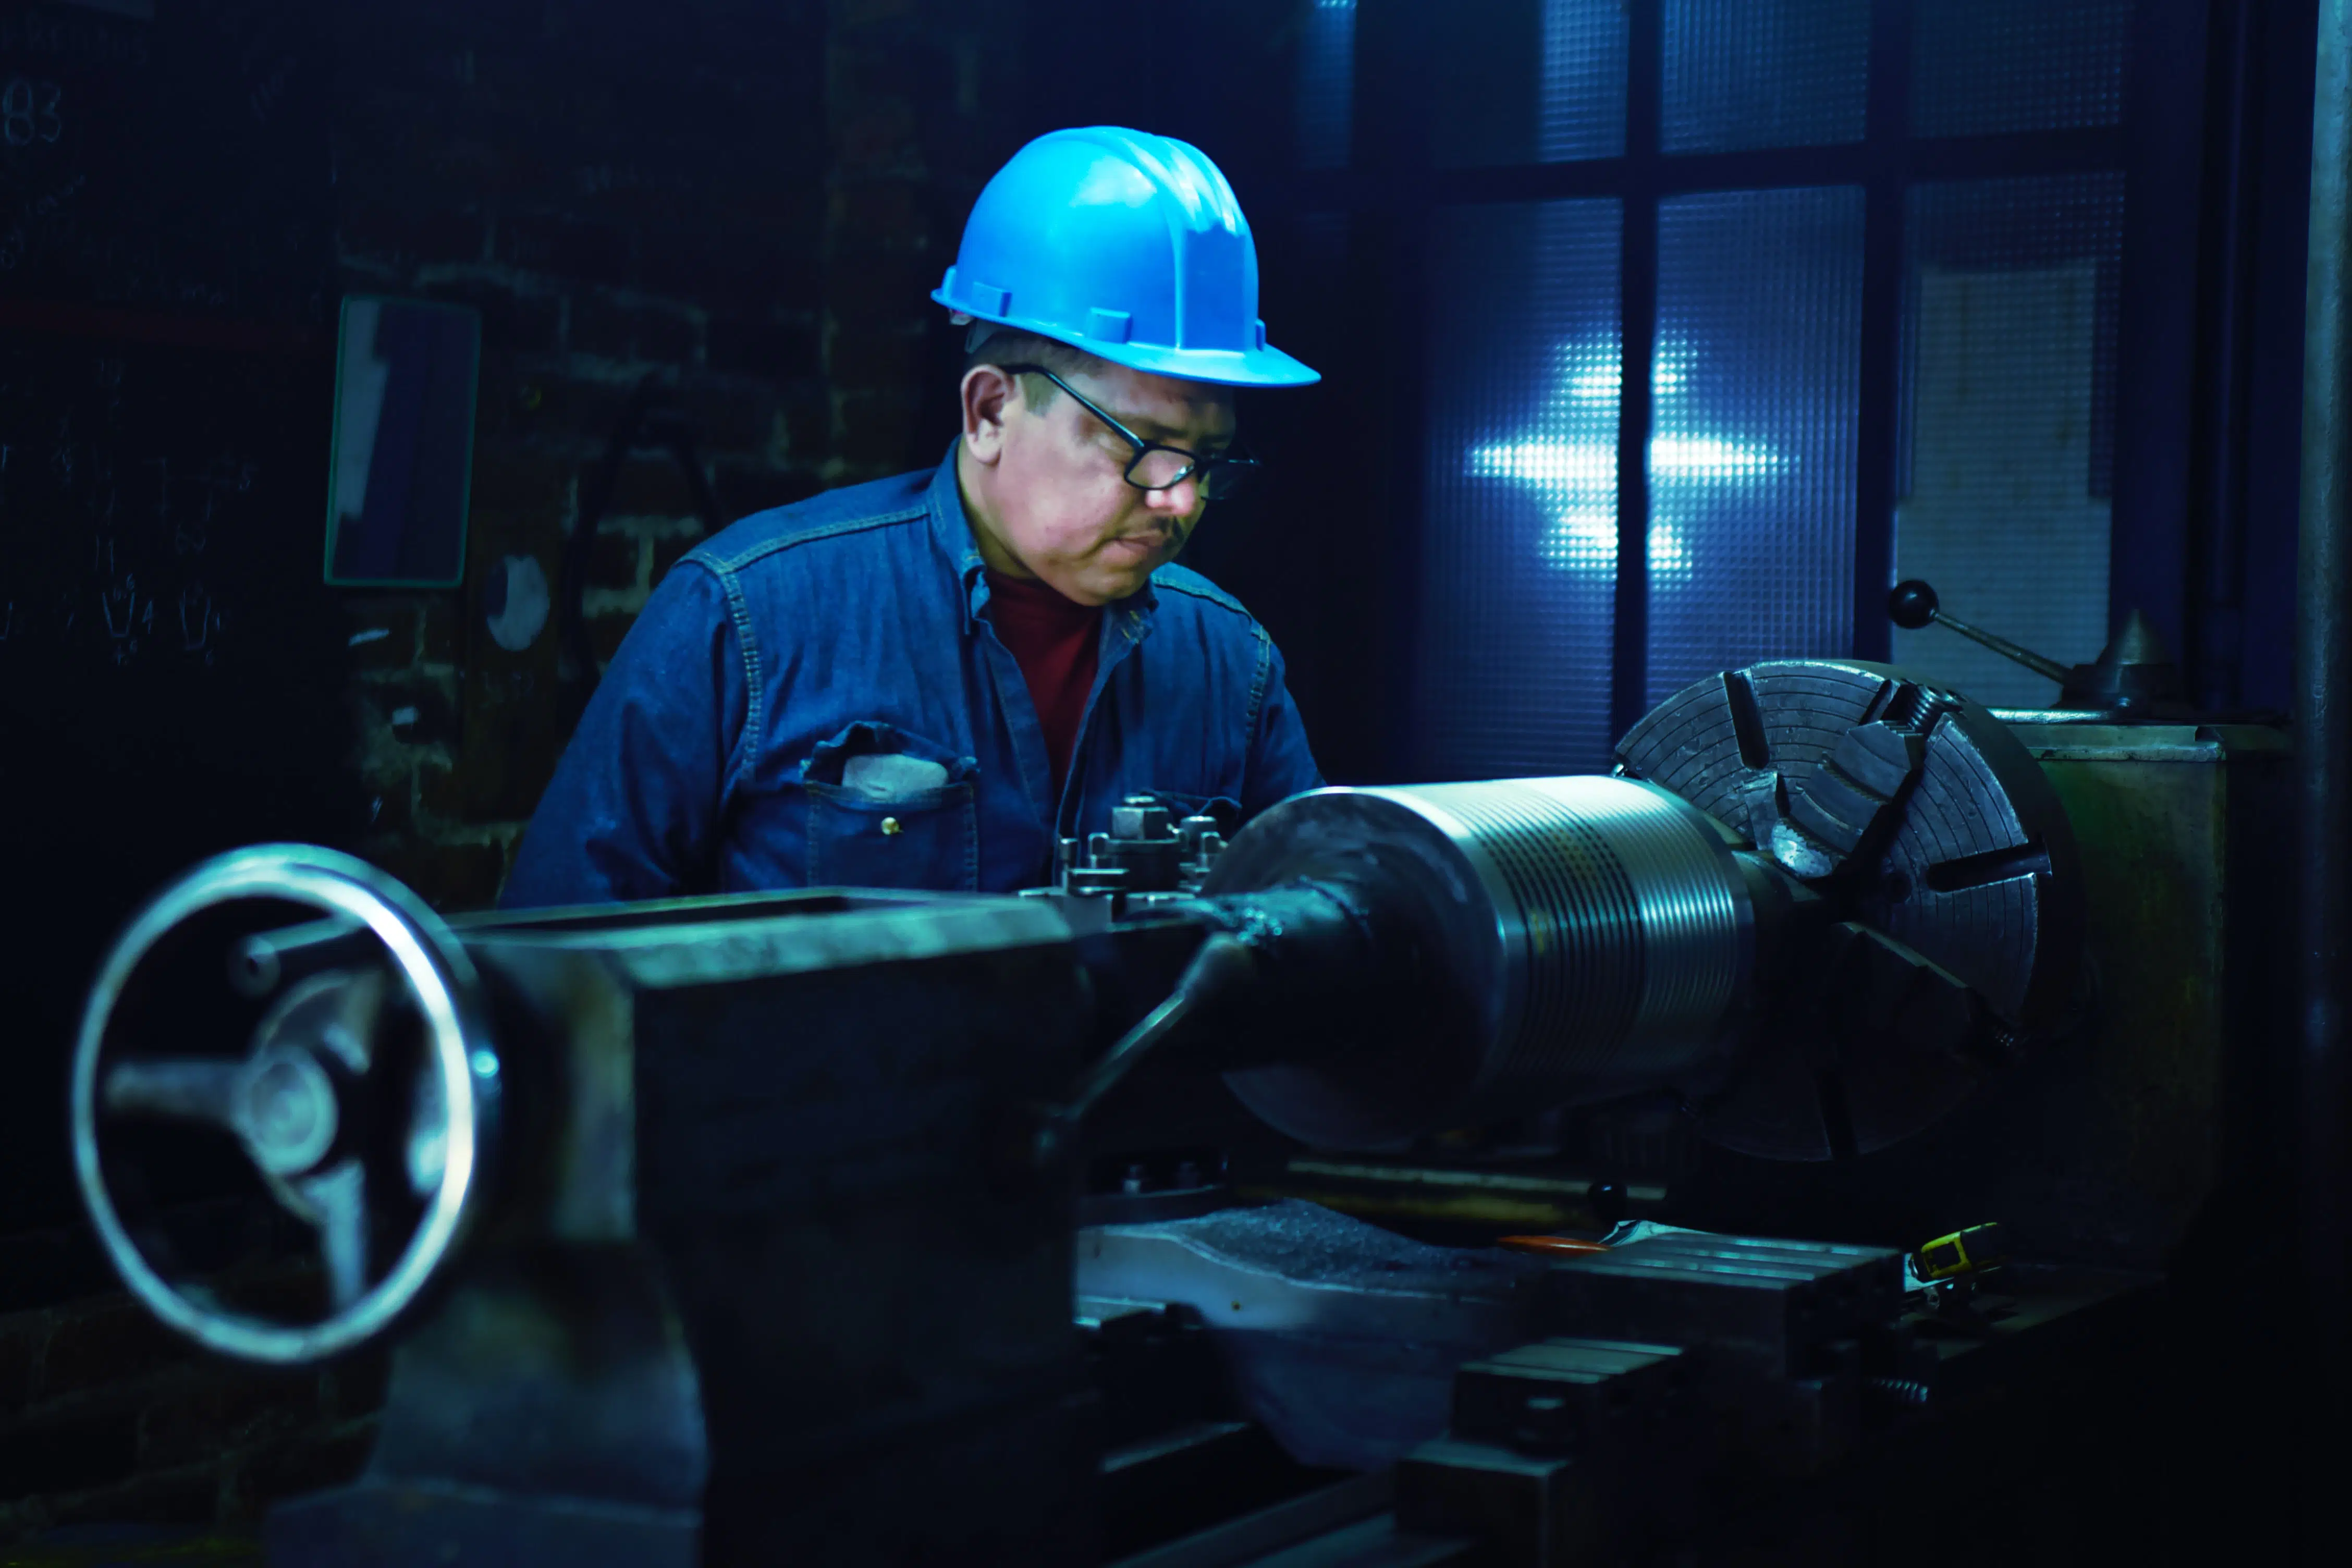 White worker with blue safety helmet operates a machine.